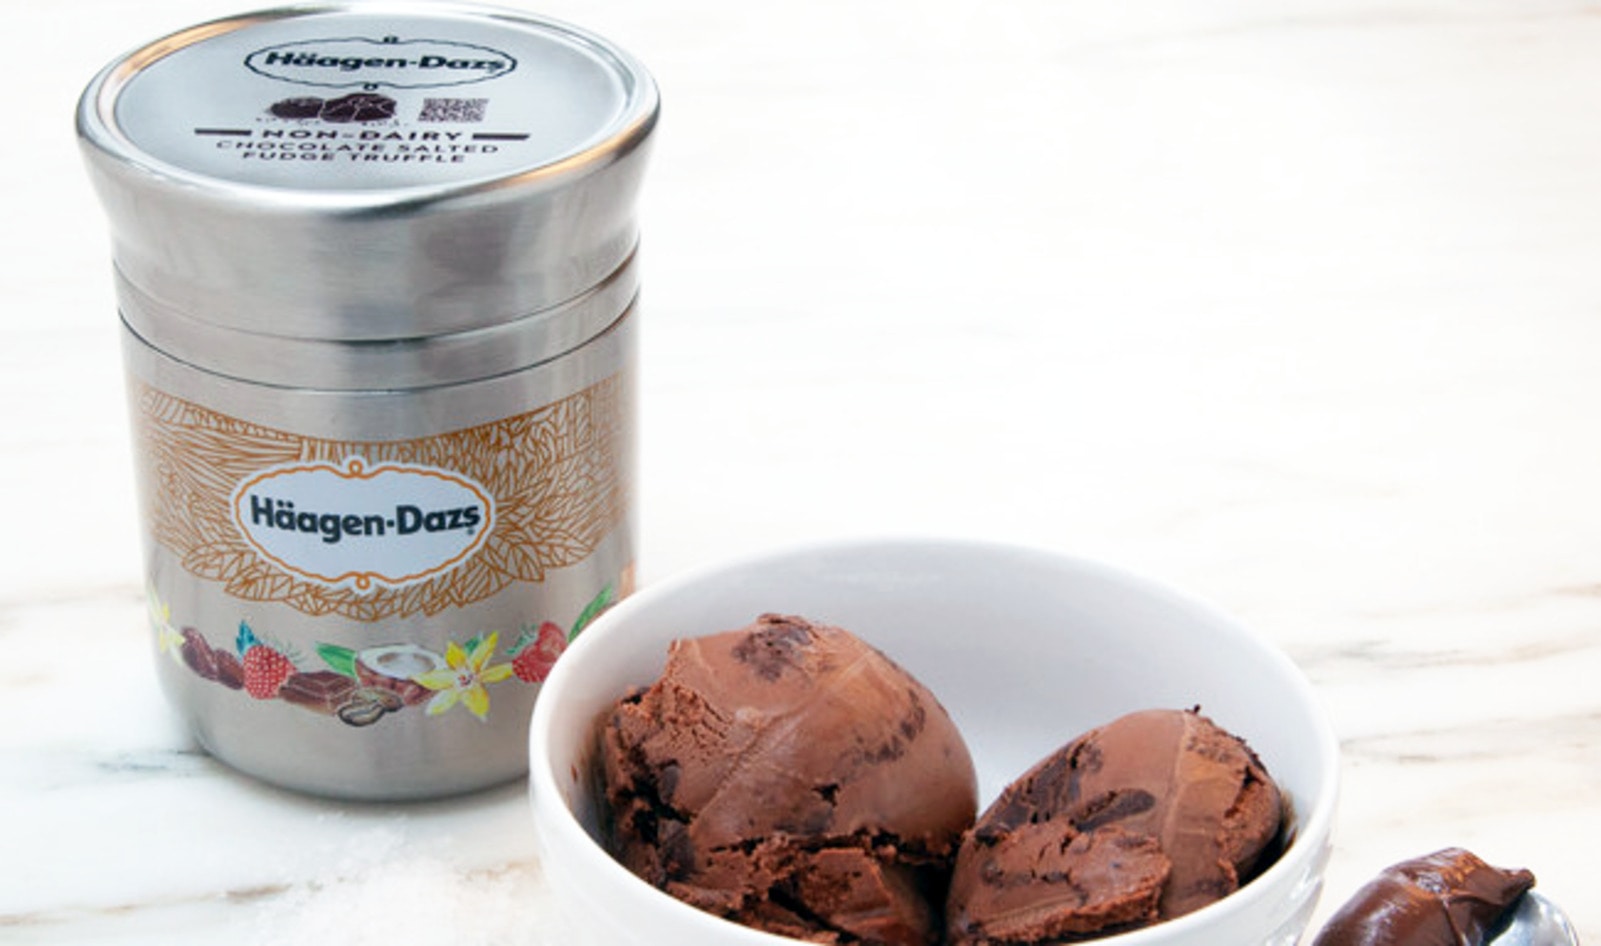 Vegan Häagen-Dazs Flavors Now Available for Delivery in Waste-Free Metal Pints